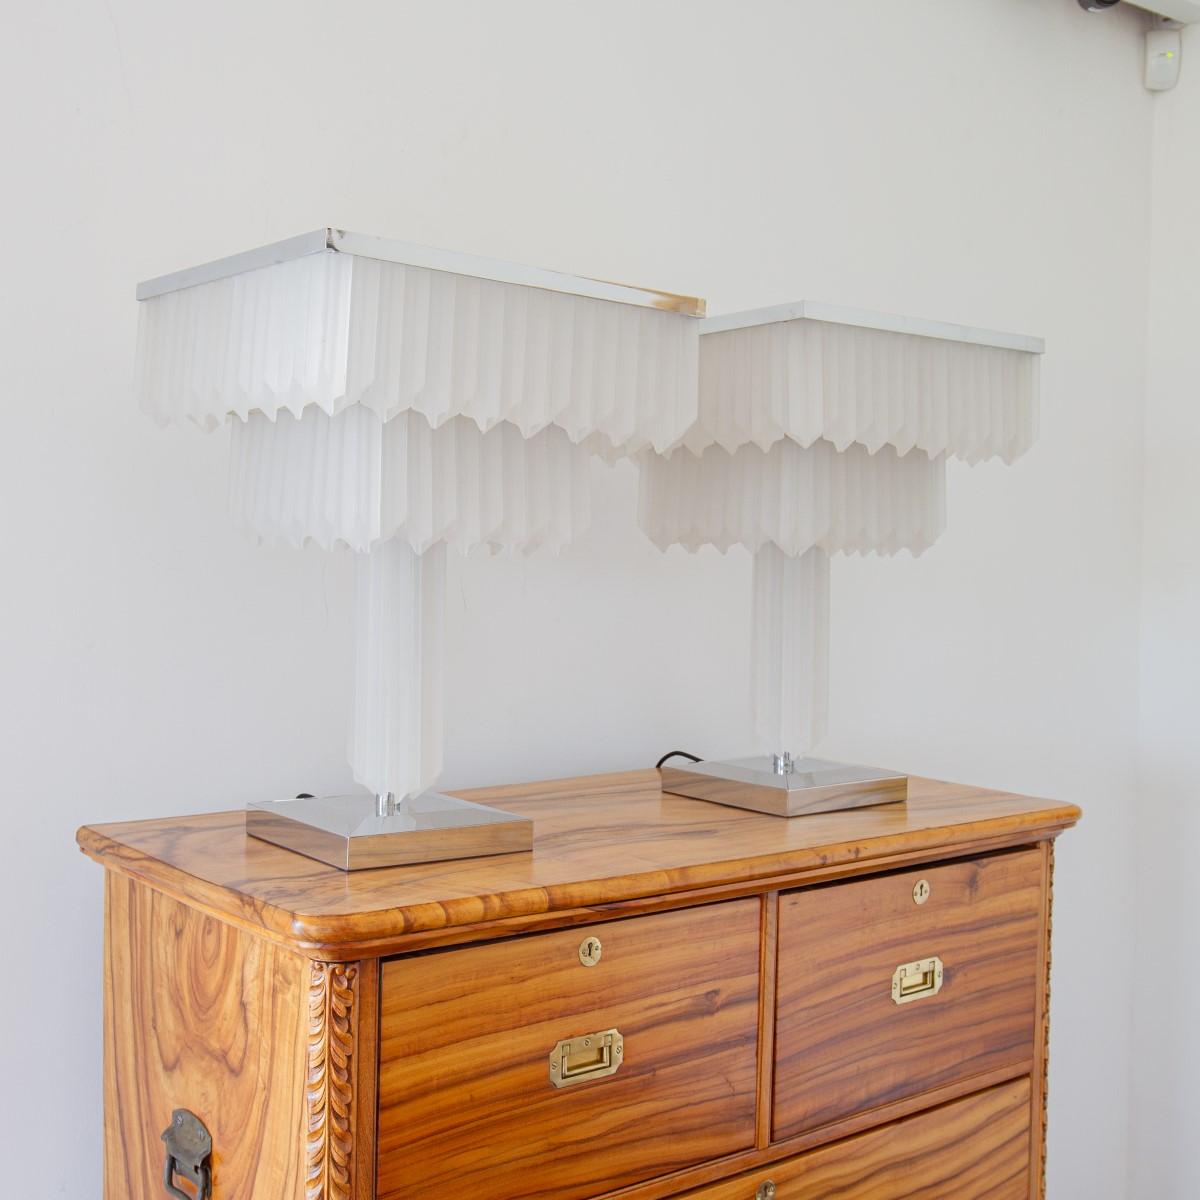 A pair of square nickel based chandelier table lamps with 1970s lucite drops, created by Ken Bolan.